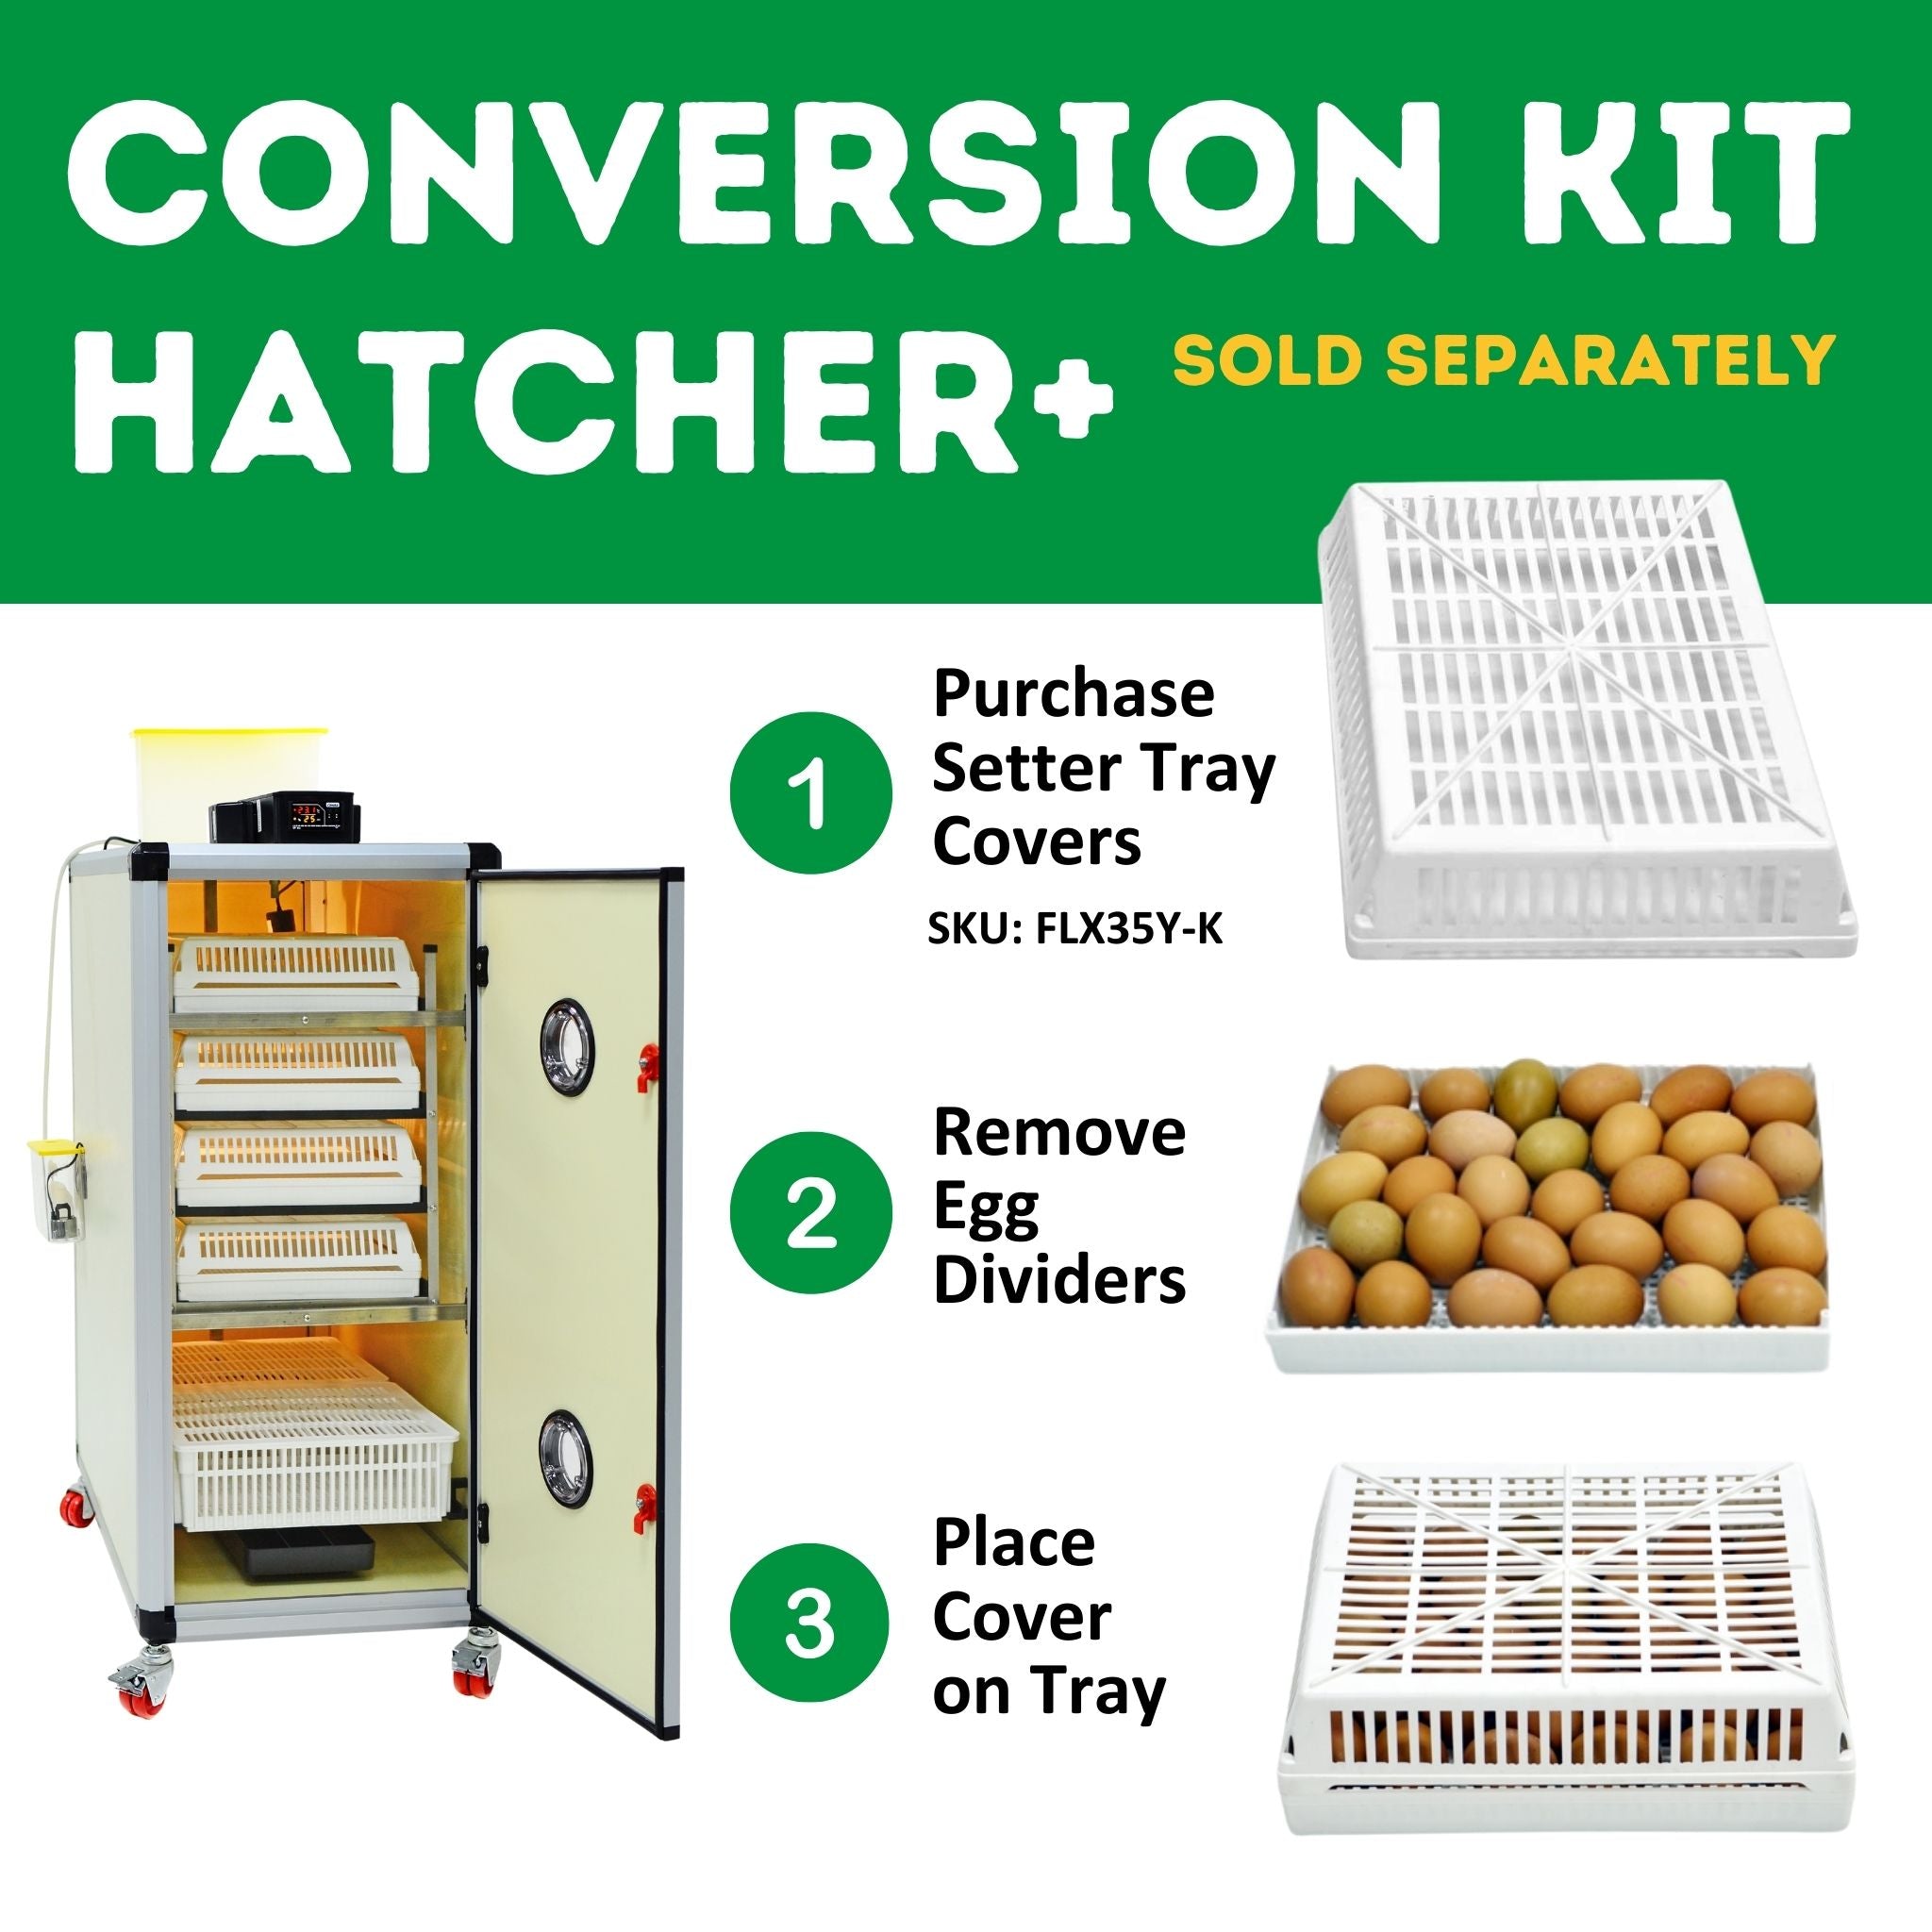 Hatching Time Cimuka. Image shows steps to apply a conversion kit for Hatcher plus assembly.